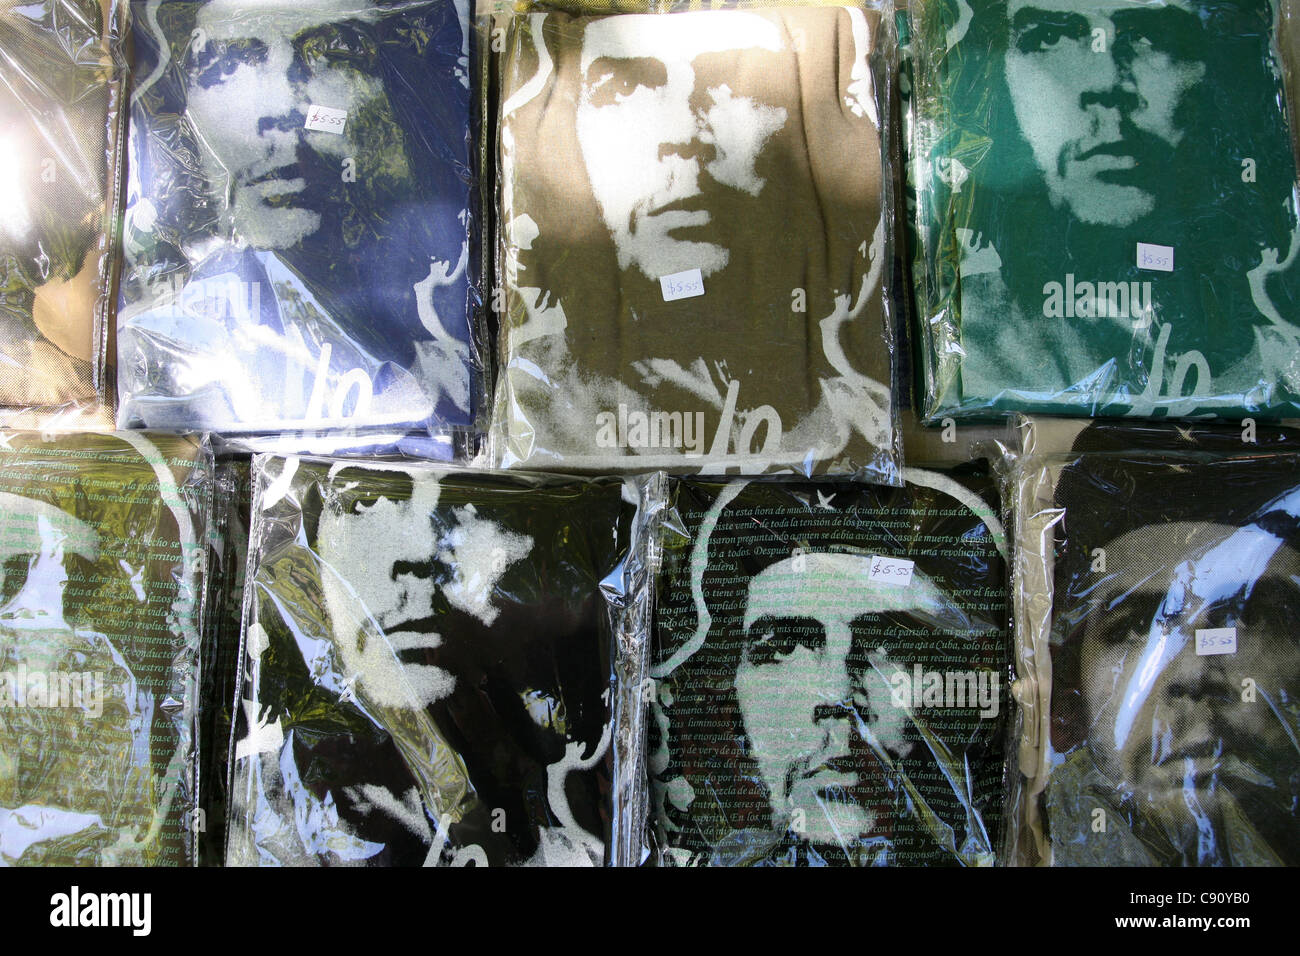 T-shirts with portraits of Che Guevara by Alberto Korda in a souvenir shop in the Vinales Valley, Cuba. Stock Photo